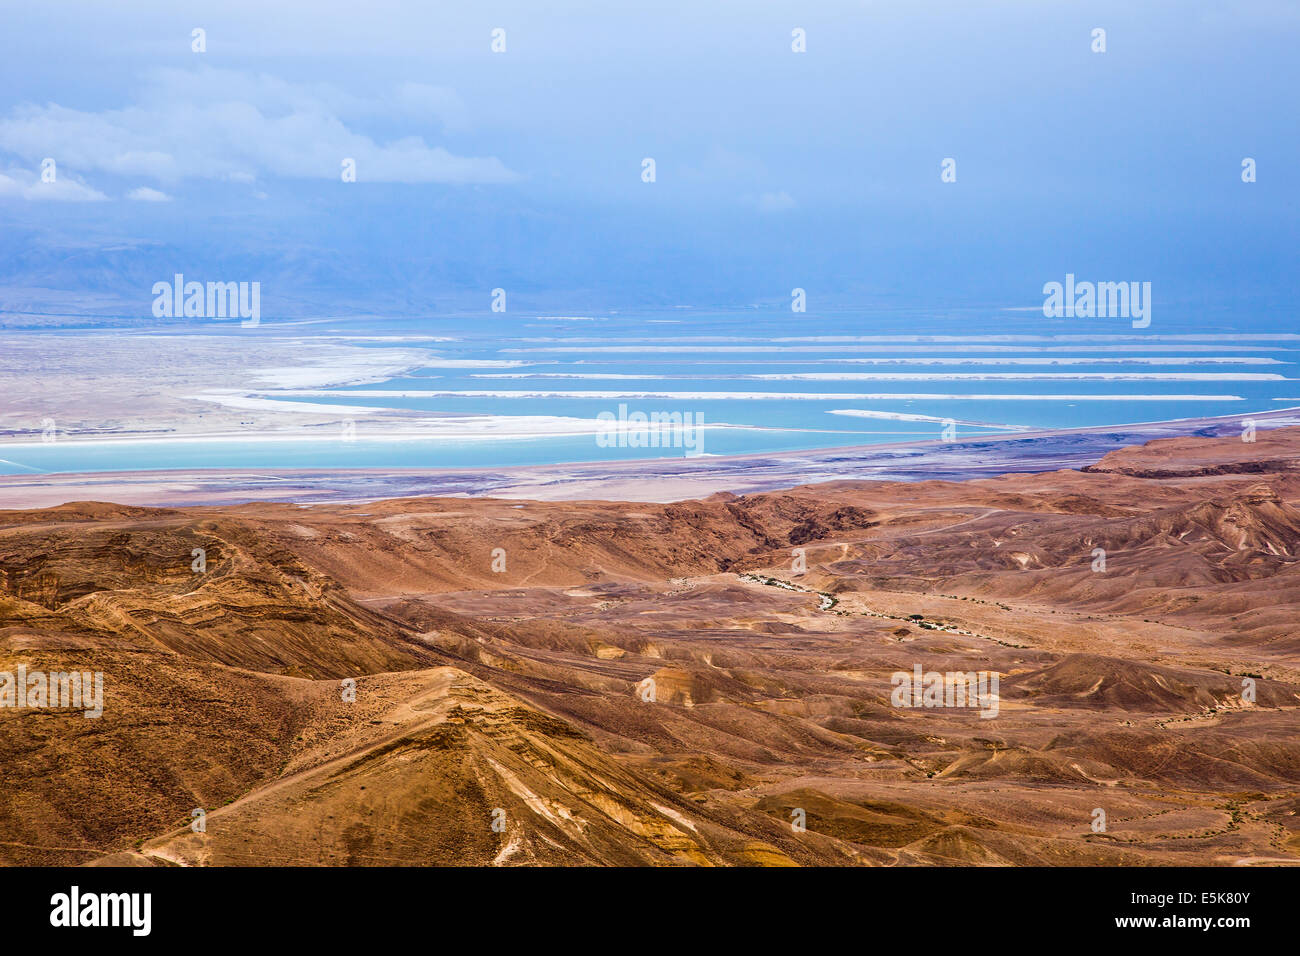 Dead Sea, Israel view from the Judaea Desert Stock Photo